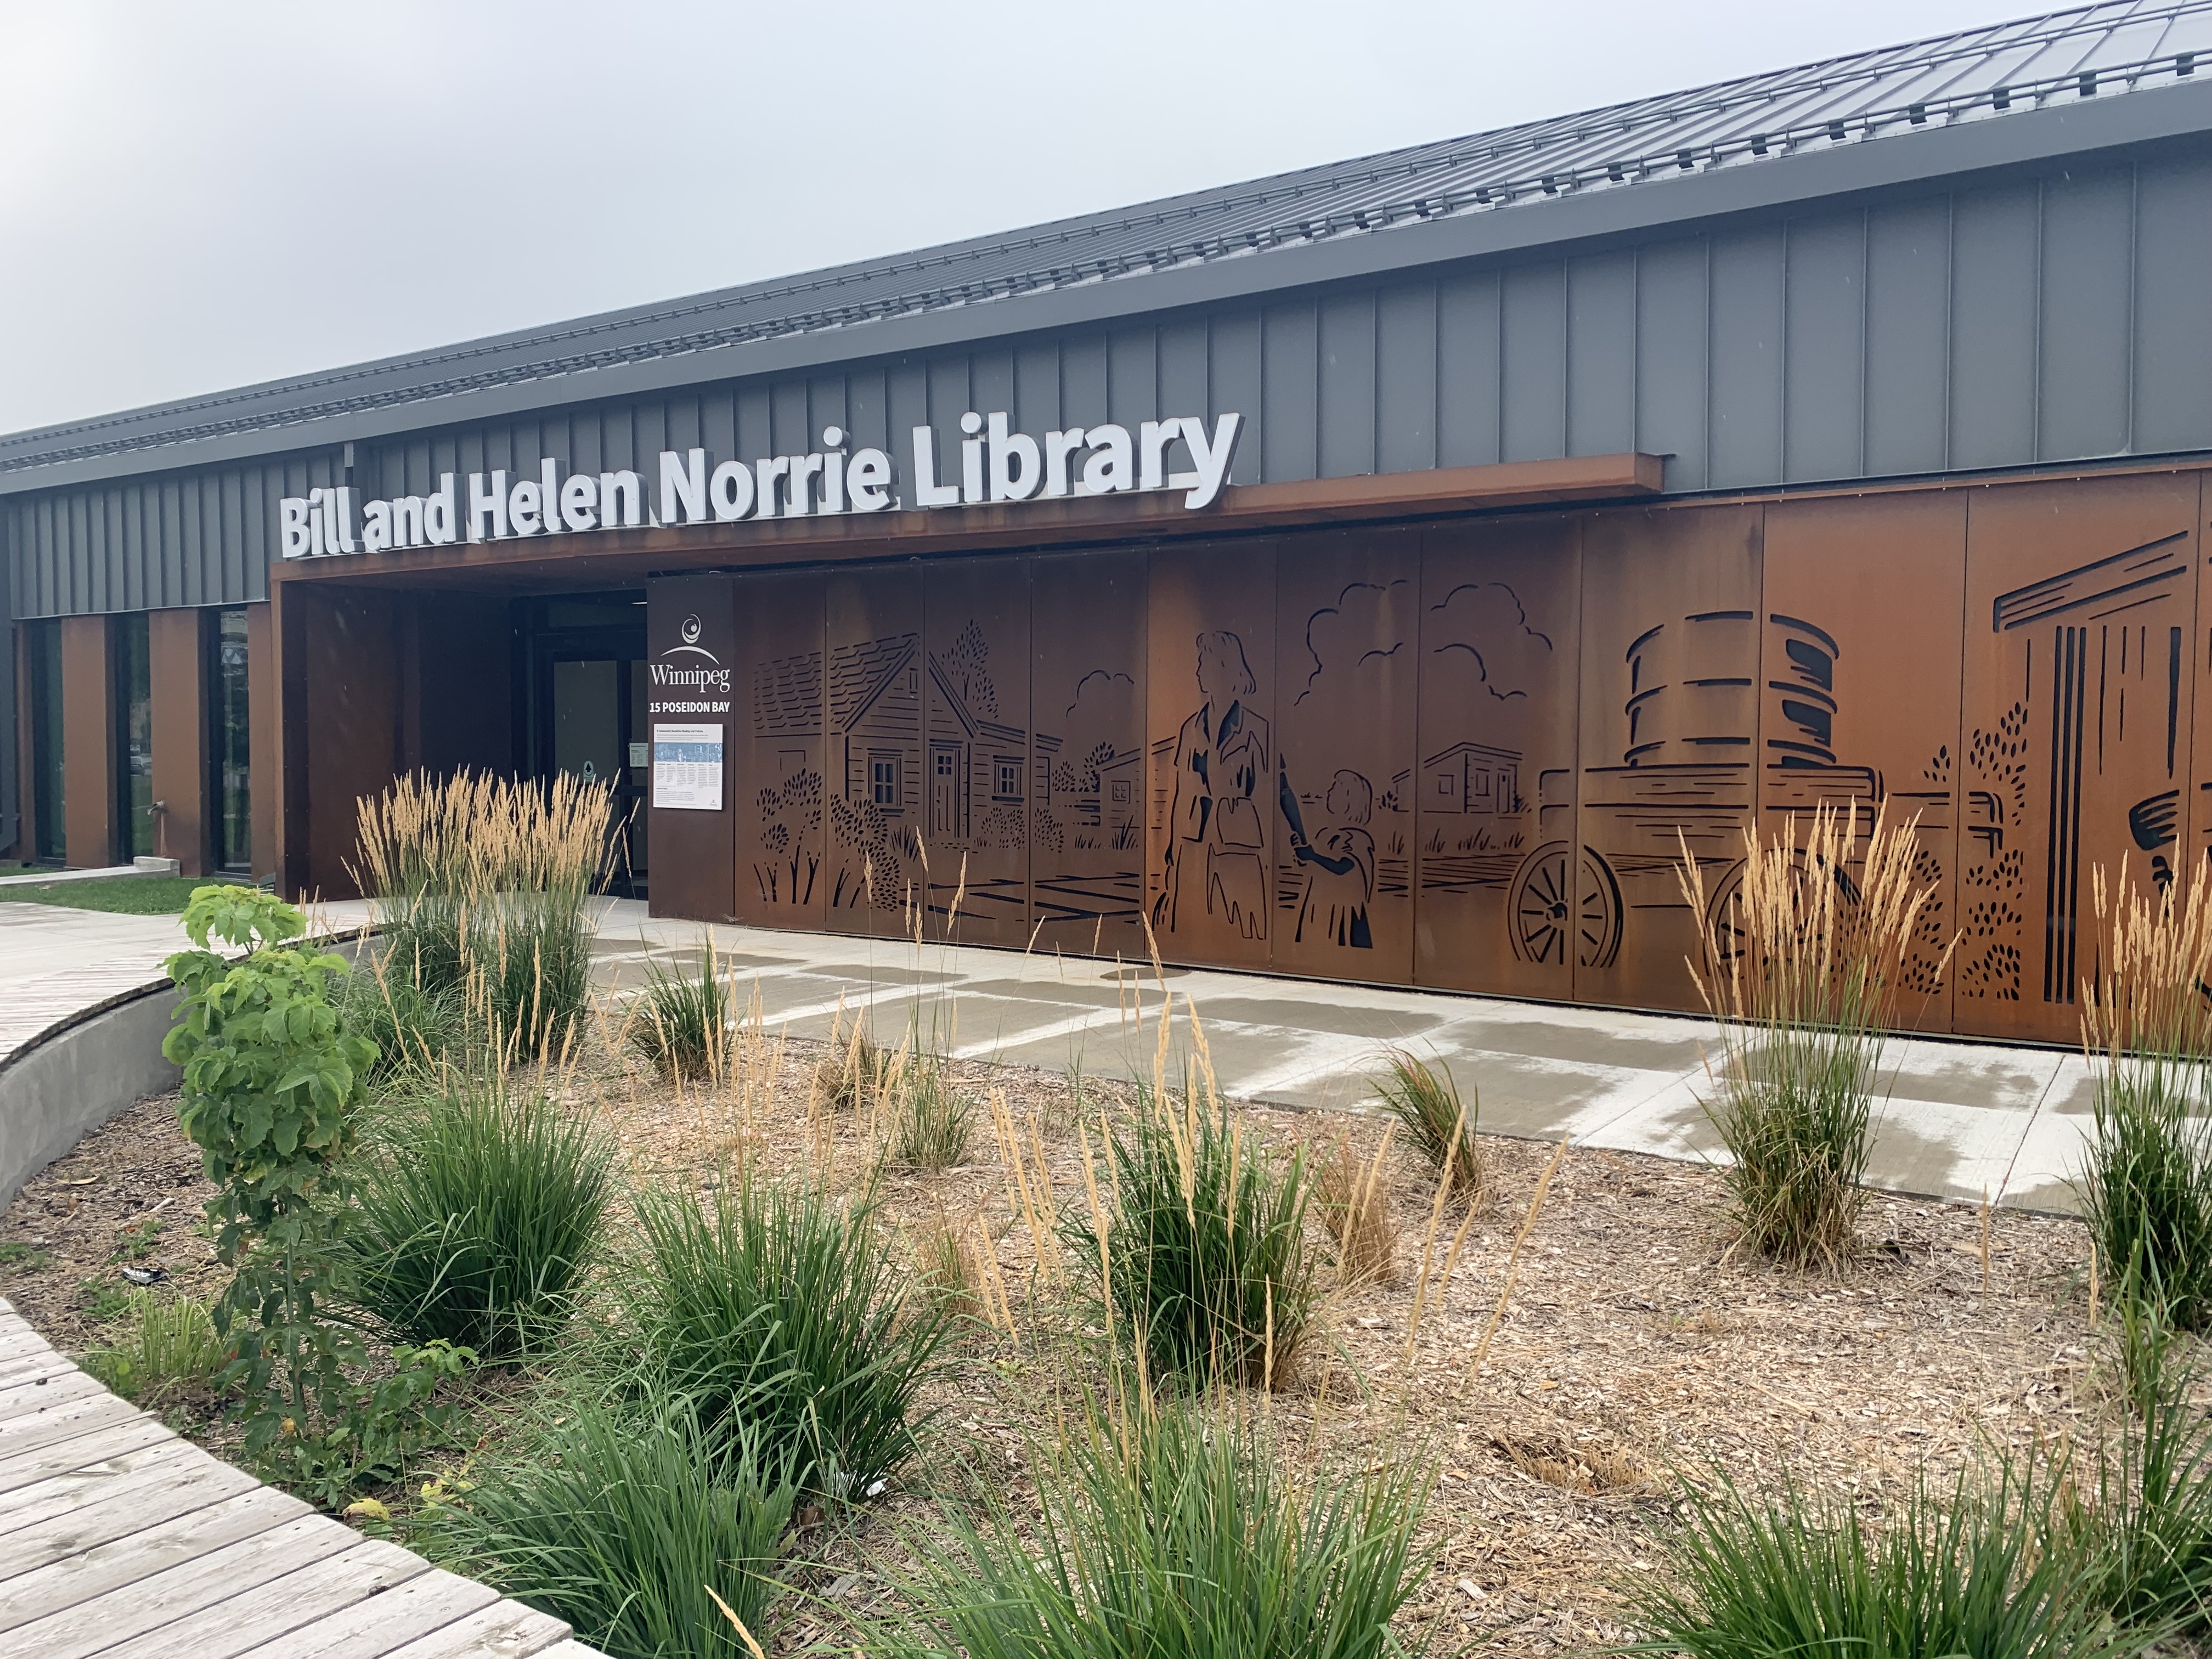 The exterior of the Bill and Helen Norrie Library.